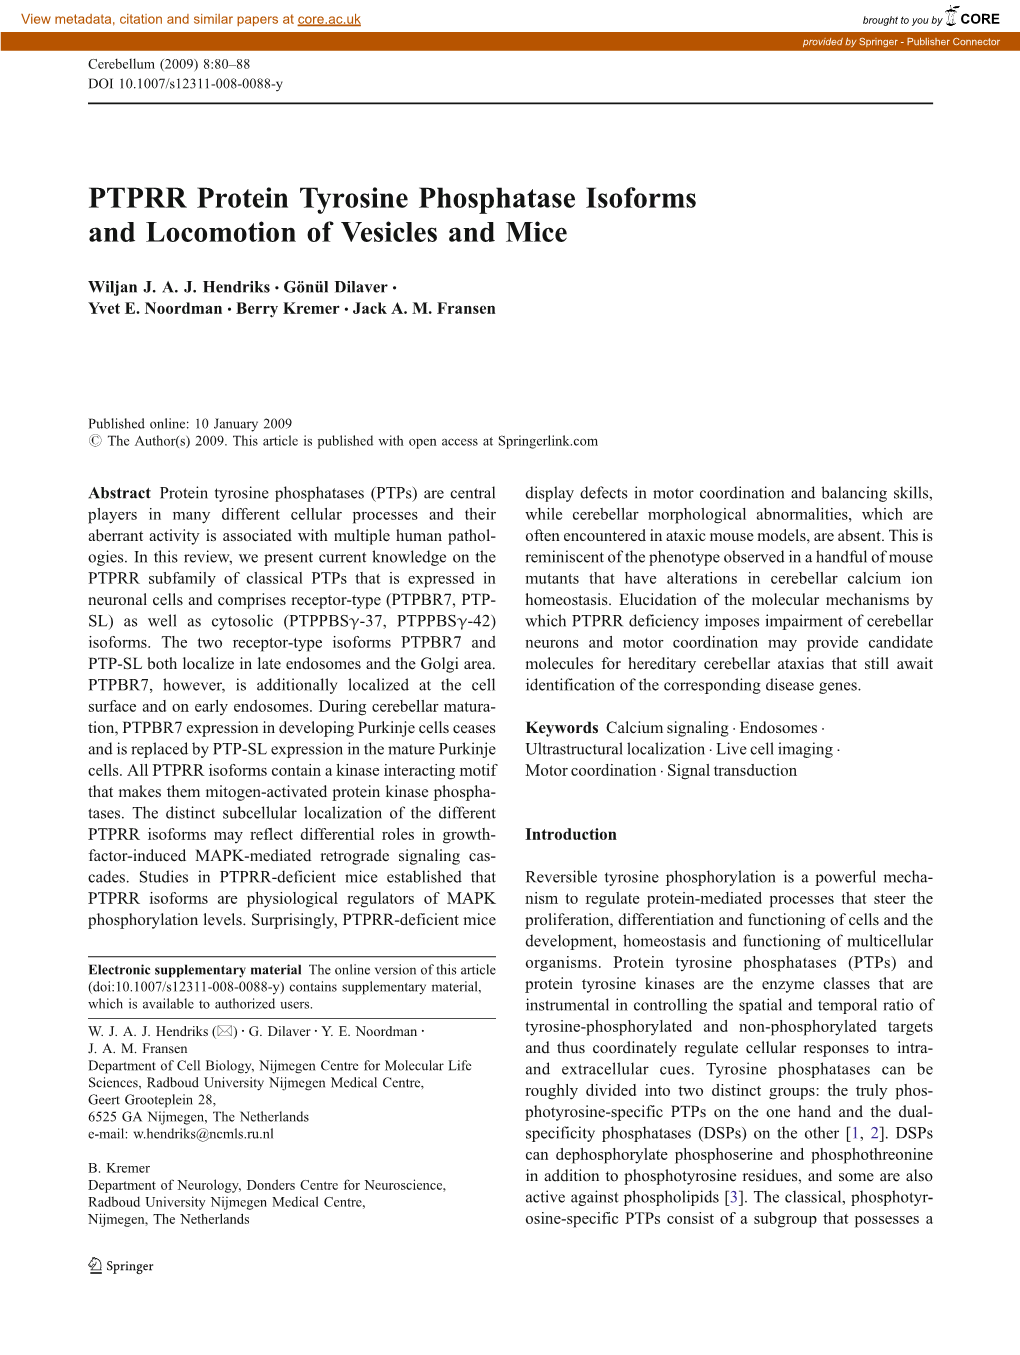 PTPRR Protein Tyrosine Phosphatase Isoforms and Locomotion of Vesicles and Mice